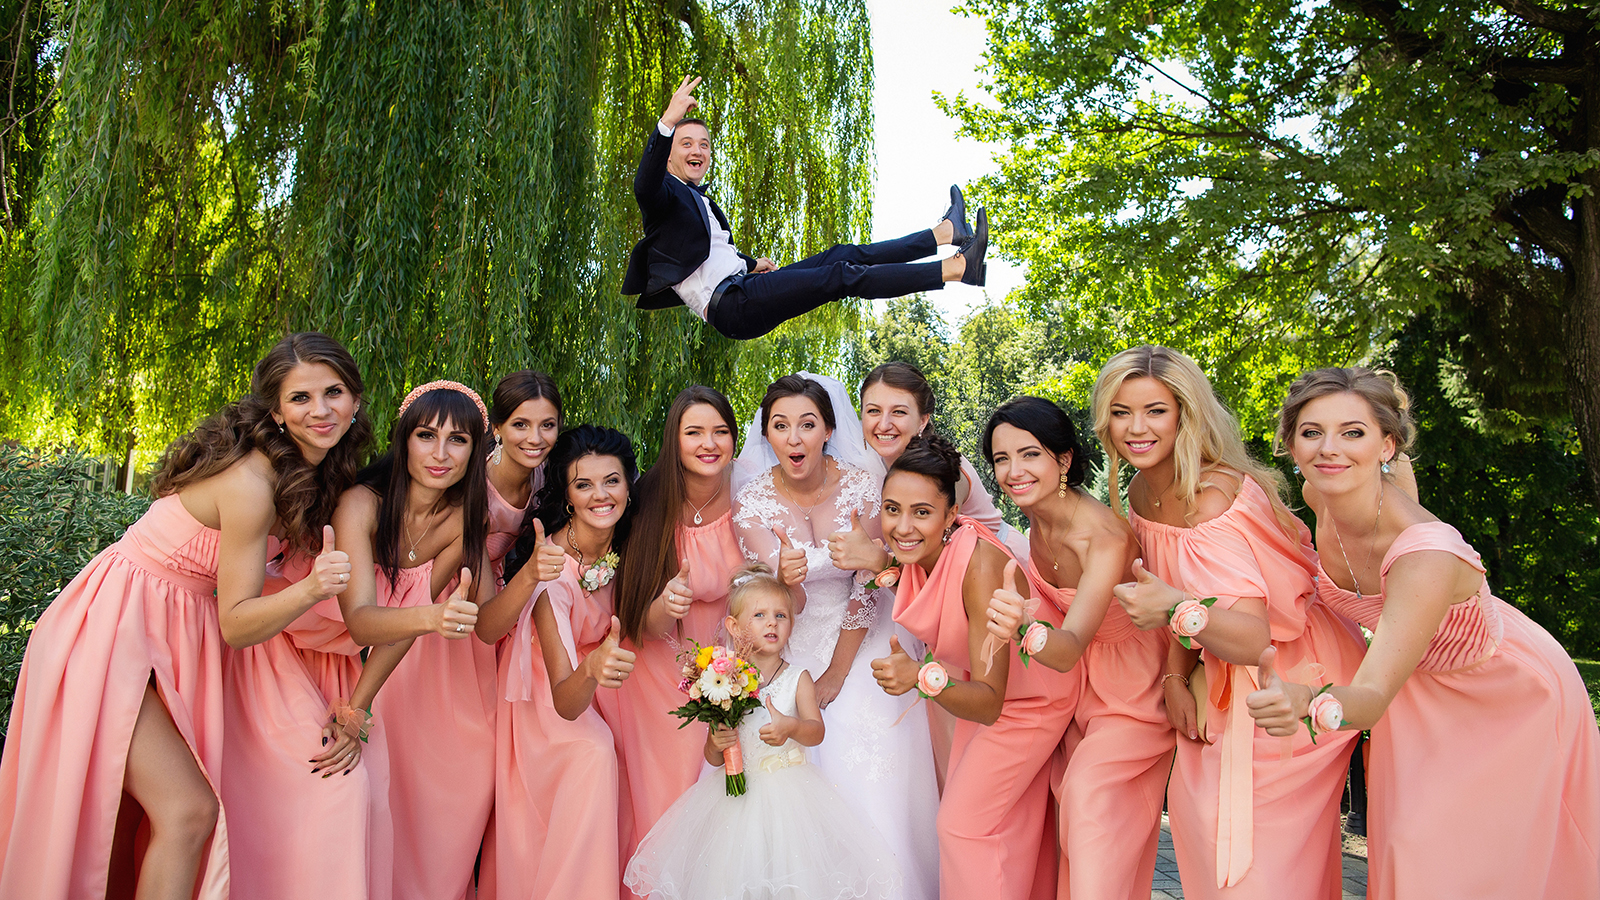 Crazy Wedding. Bride and bridesmaids having fun after wedding ceremony. Groom flying in background with help of groomsmen. Bridesmaid dresses. Bride groom and guests at wedding day. Wedding concept